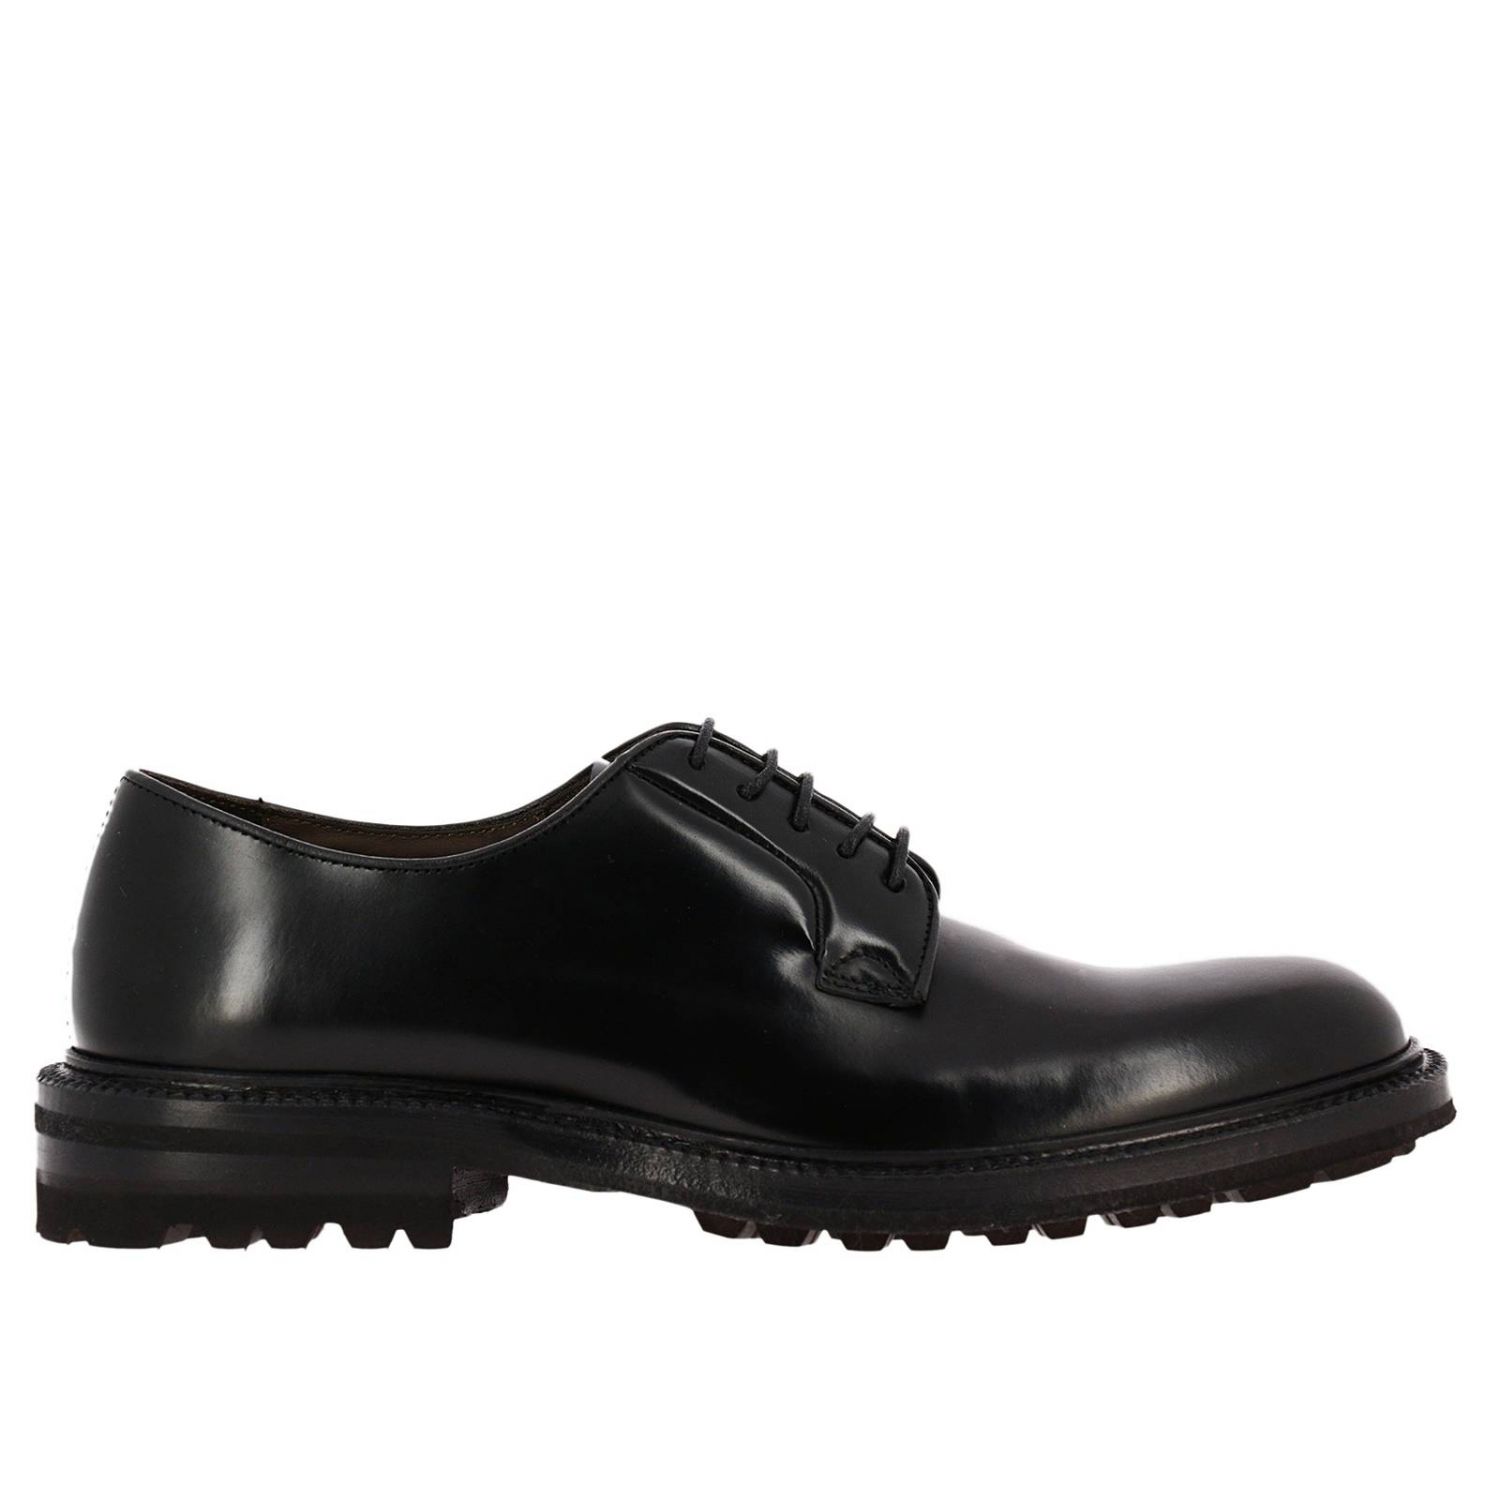 Green George Outlet: Shoes men - Black | Brogue Shoes Green George 4058 ...